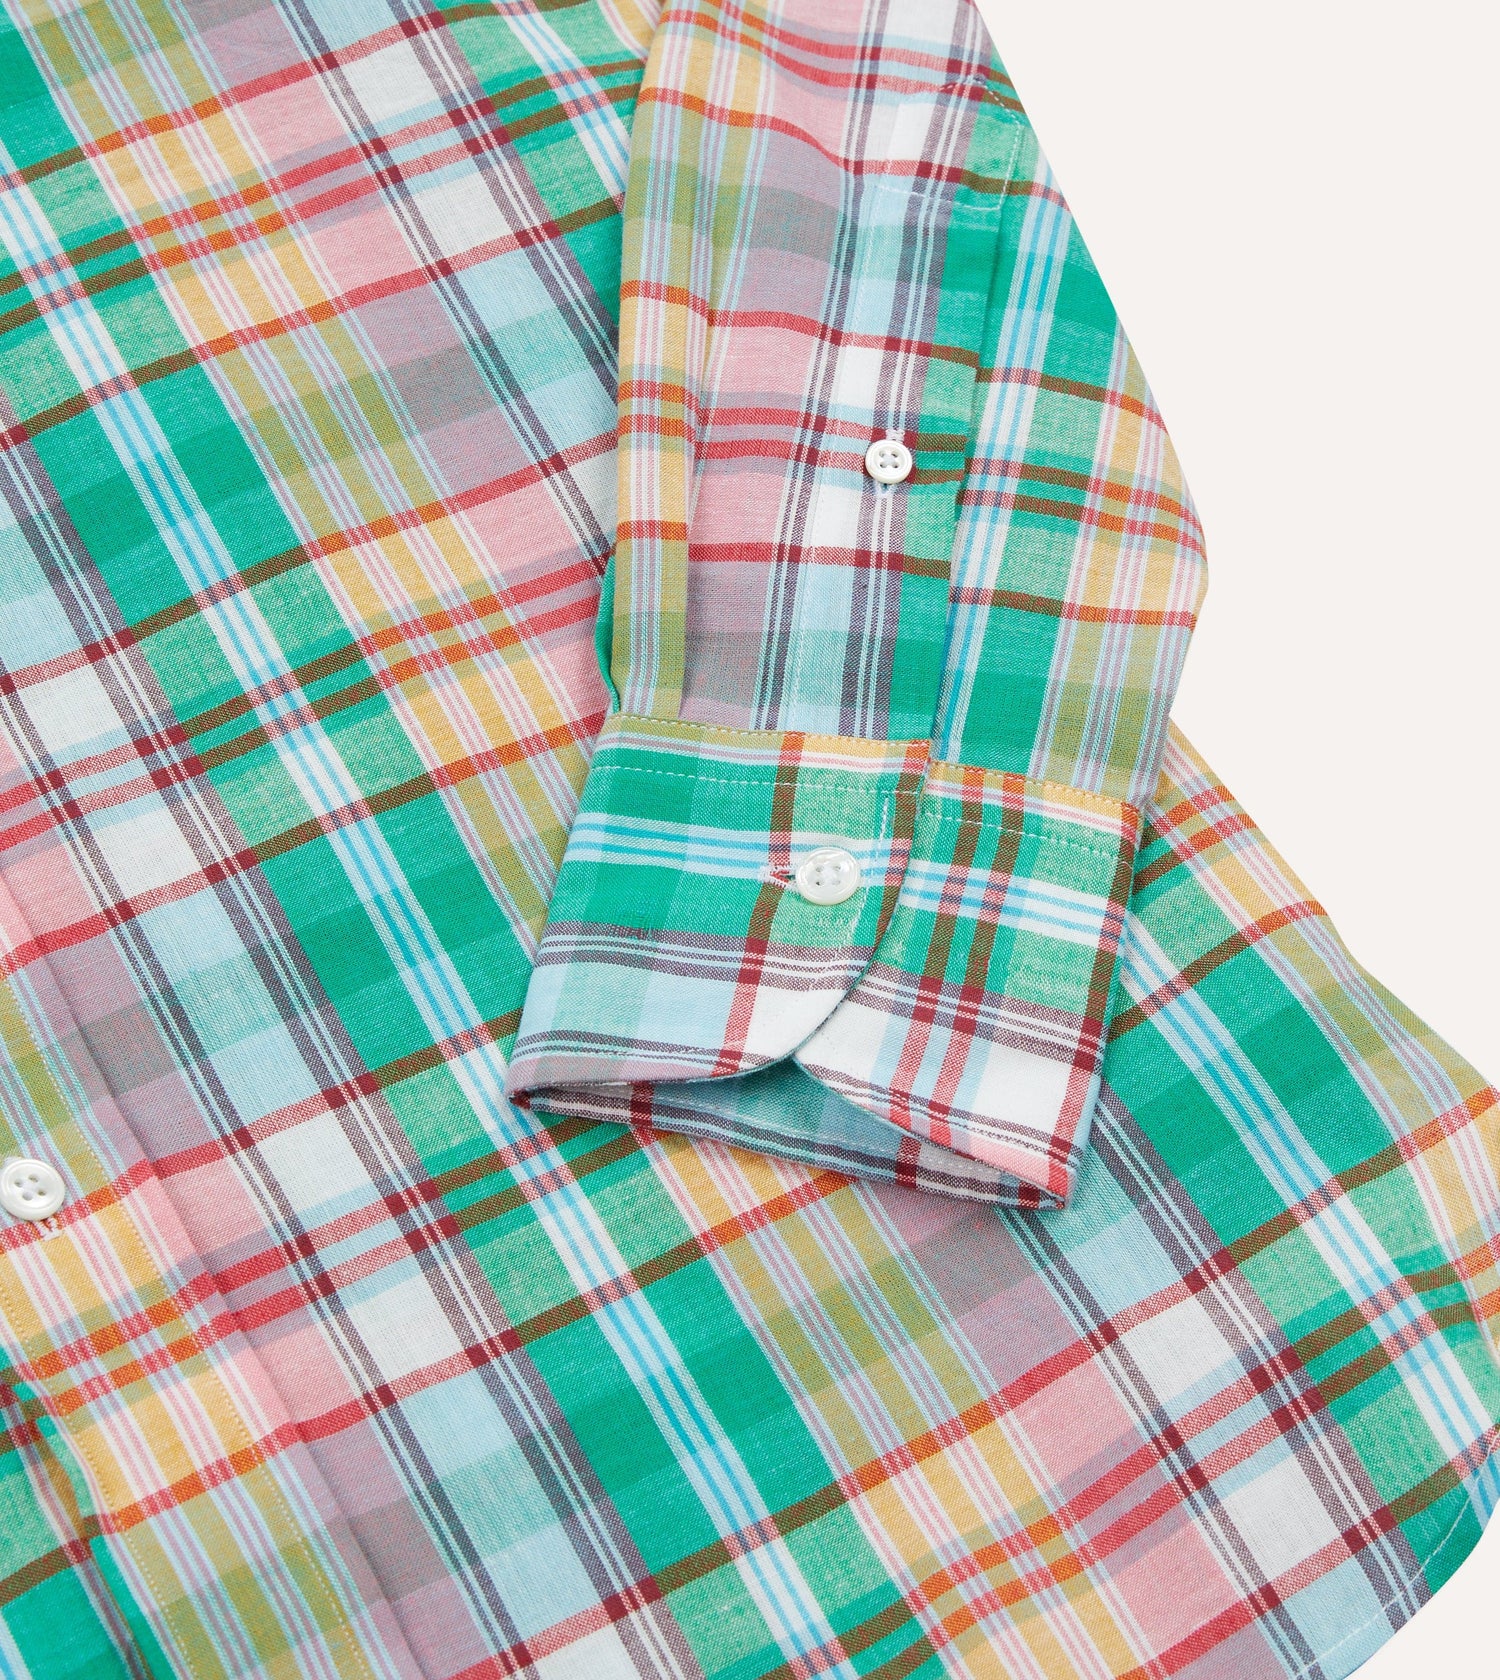 Green and Blue Madras Check Cotton Button-Down Shirt